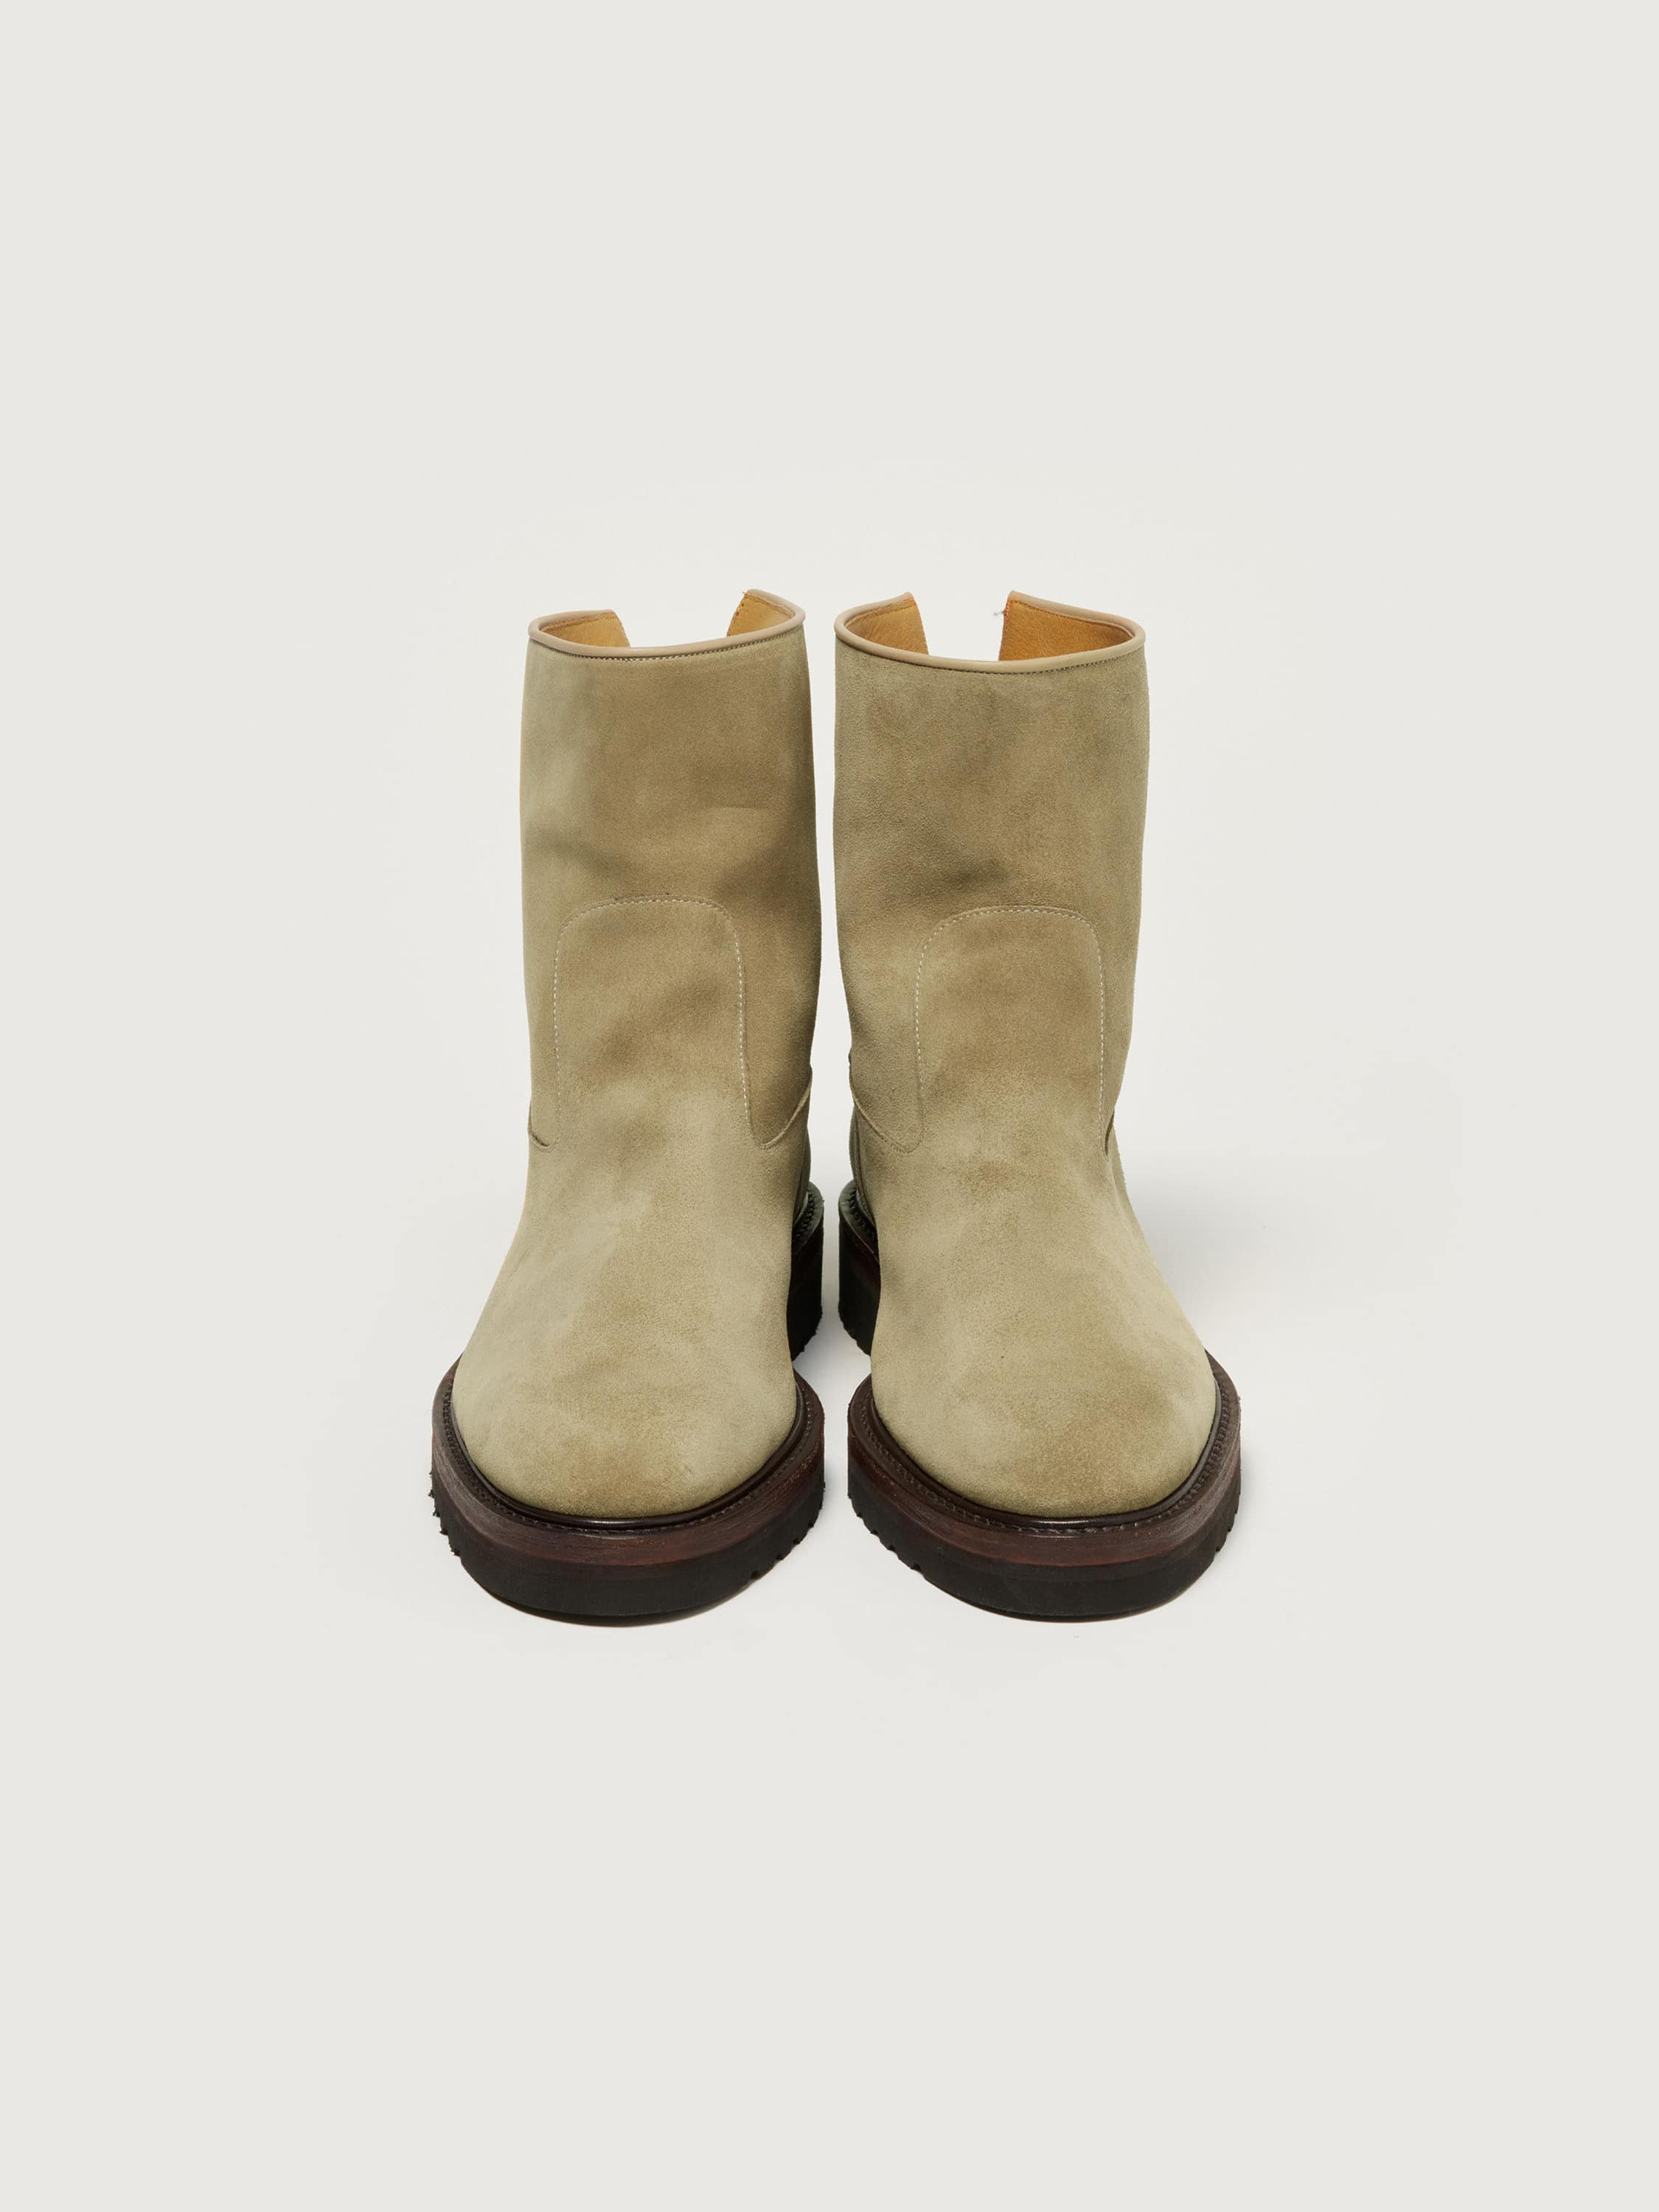 LEATHER BOOTS 詳細画像 BEIGE SUEDE 2